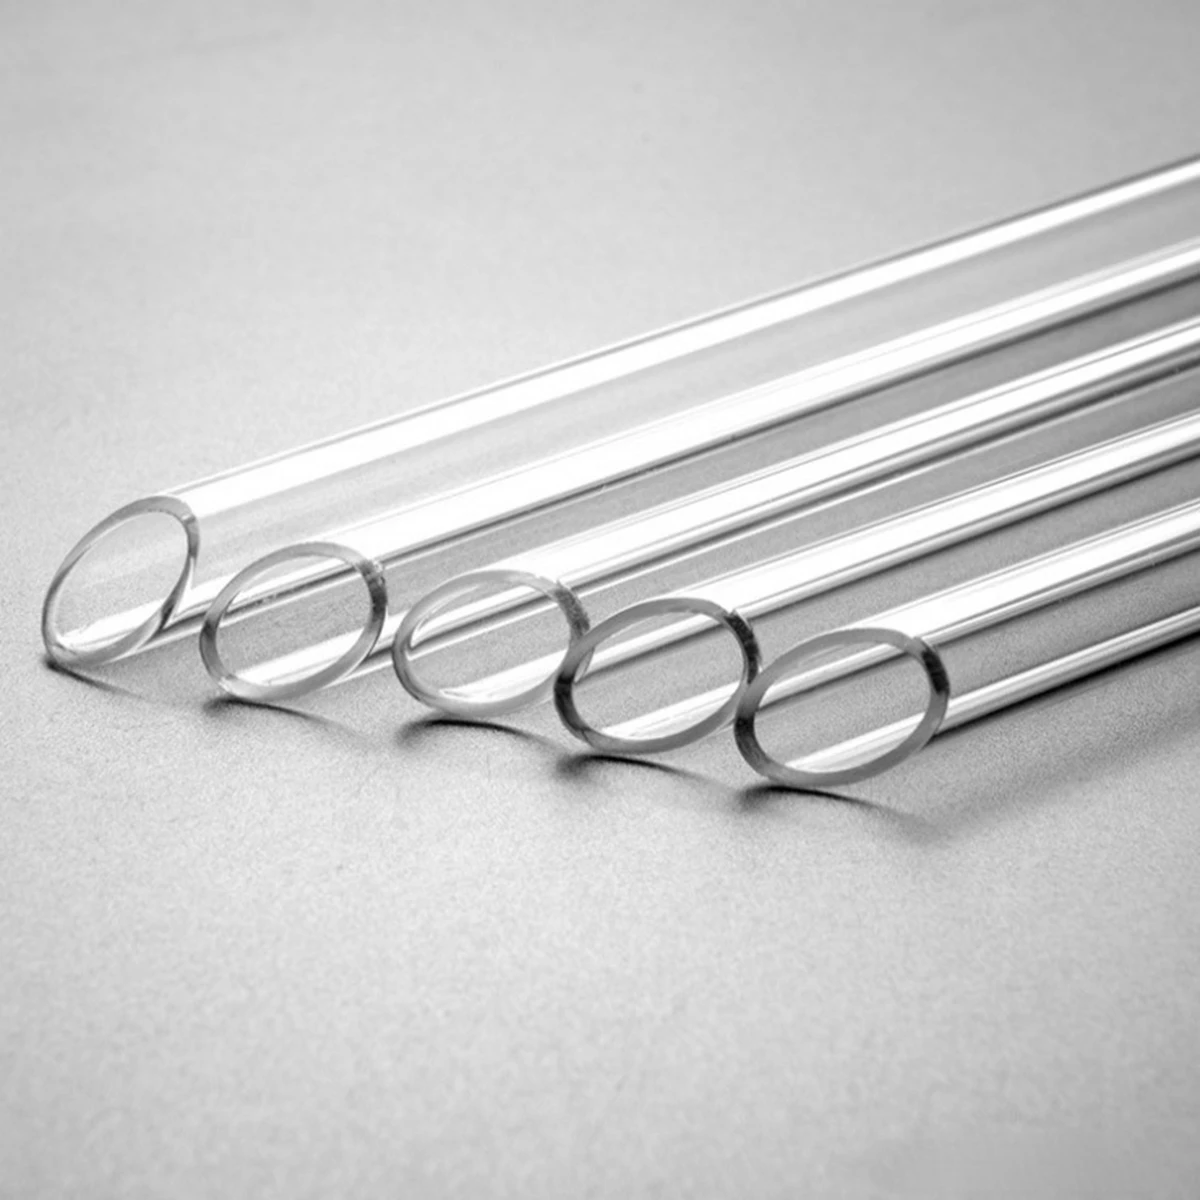 

14mm Extra Wide Glass Straws Reusable Bubble Tea Straws Drinking Straws for Boba Smoothie Juice Eco-friendly Large Straw